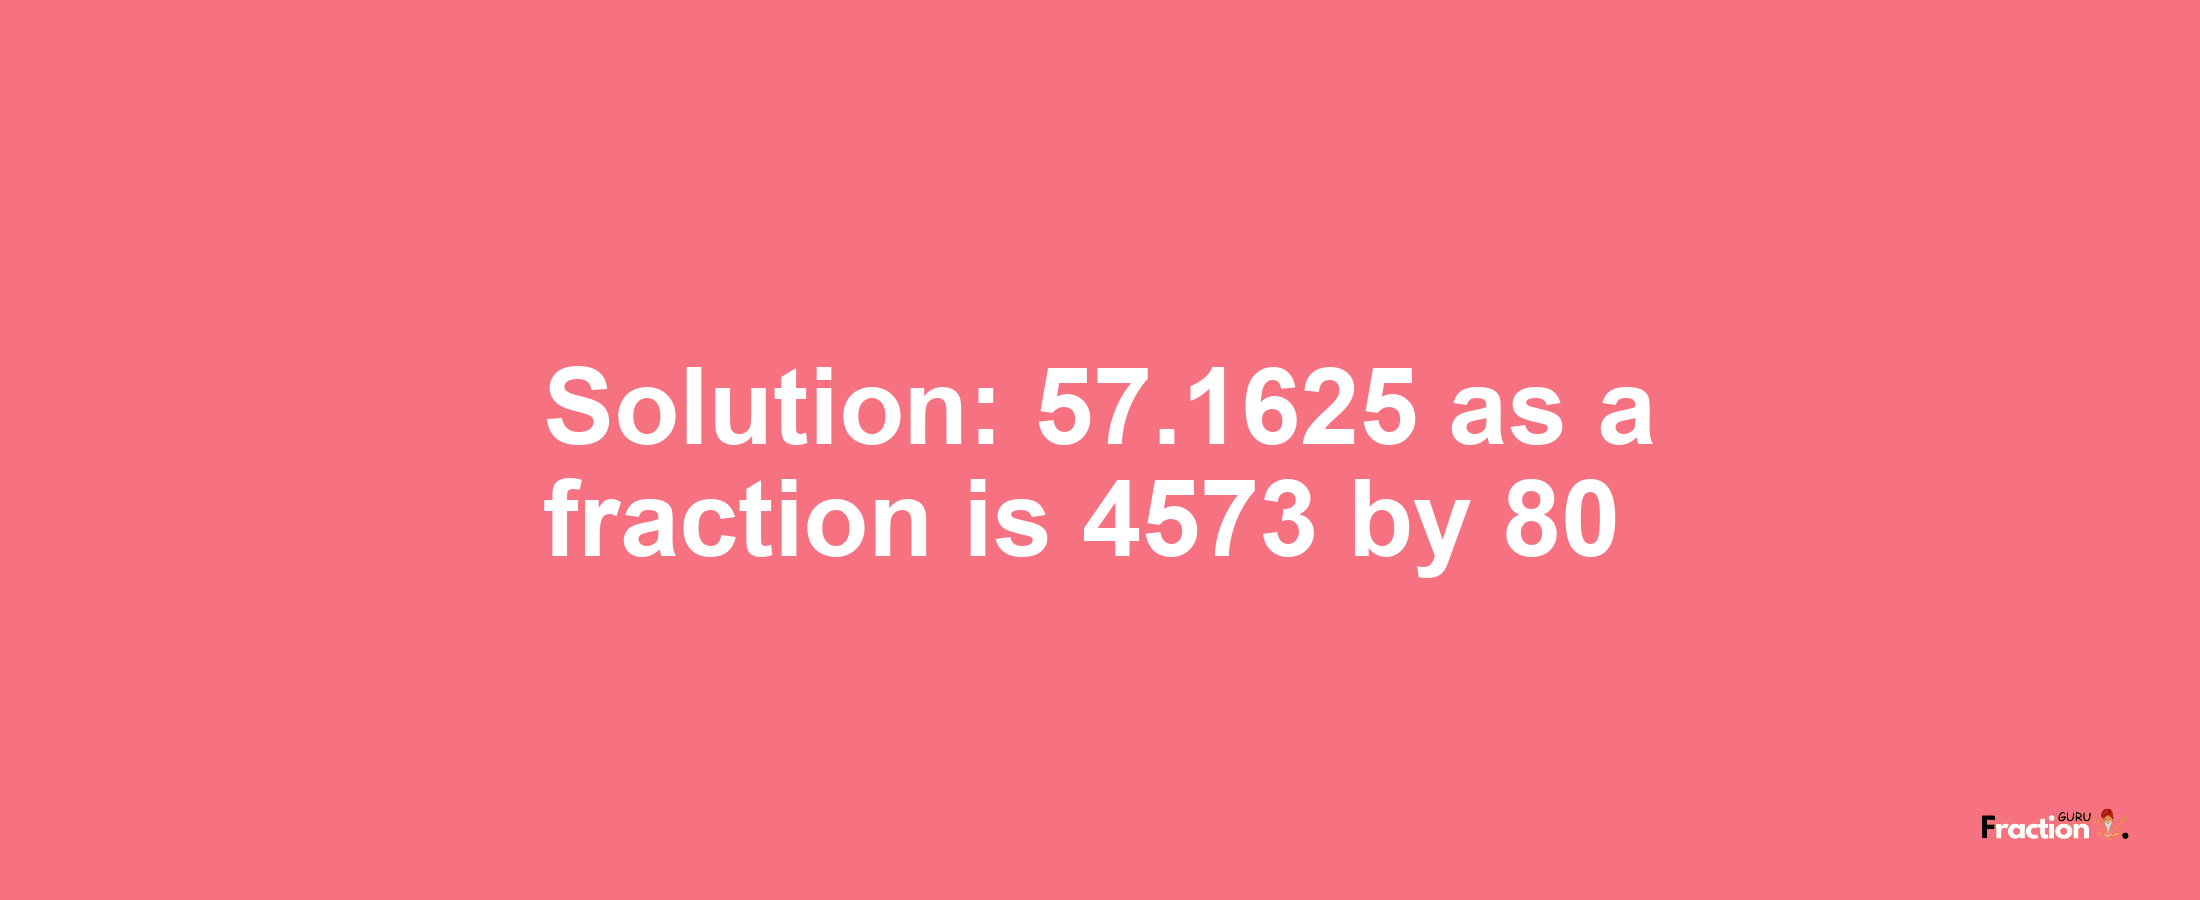 Solution:57.1625 as a fraction is 4573/80